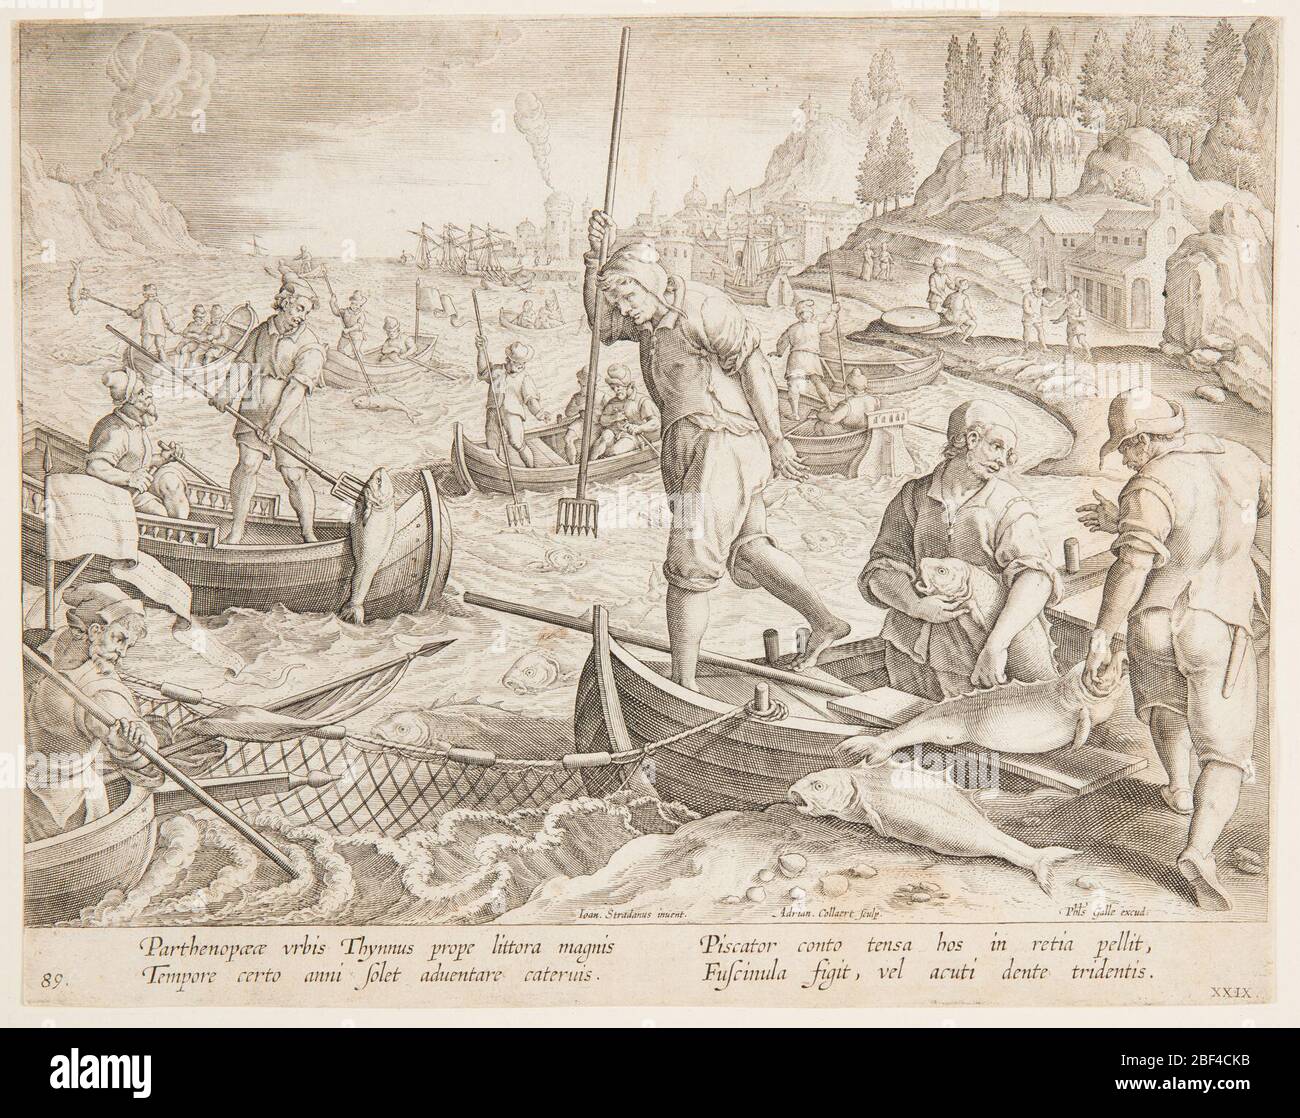 Tuna fishing. Horizontal rectangle. Fishermen in open boats spread their net in the foreground, and spear the fish caught in it. Harbor with ships in the background at right. At left center: 'Ioan. Stradanus invent.'; right of center: 'Adrian. Stock Photo